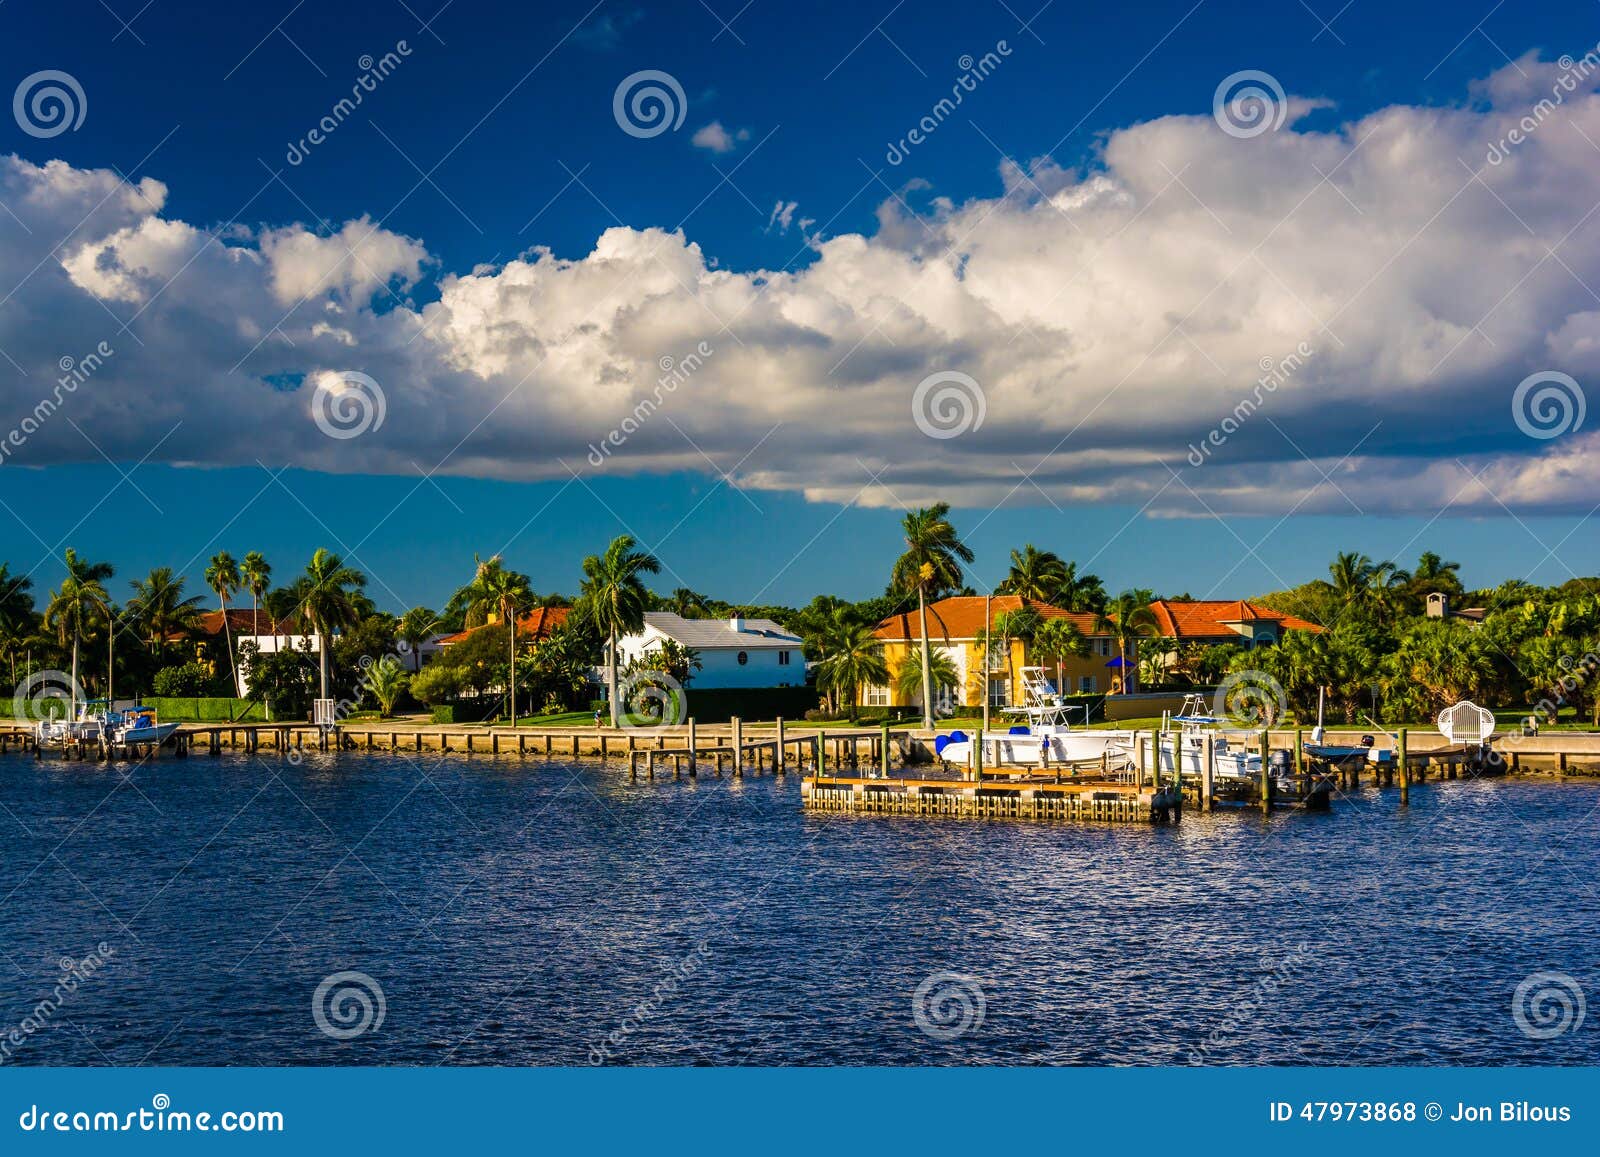 houses along the intracoastal waterway in west palm beach, florida.